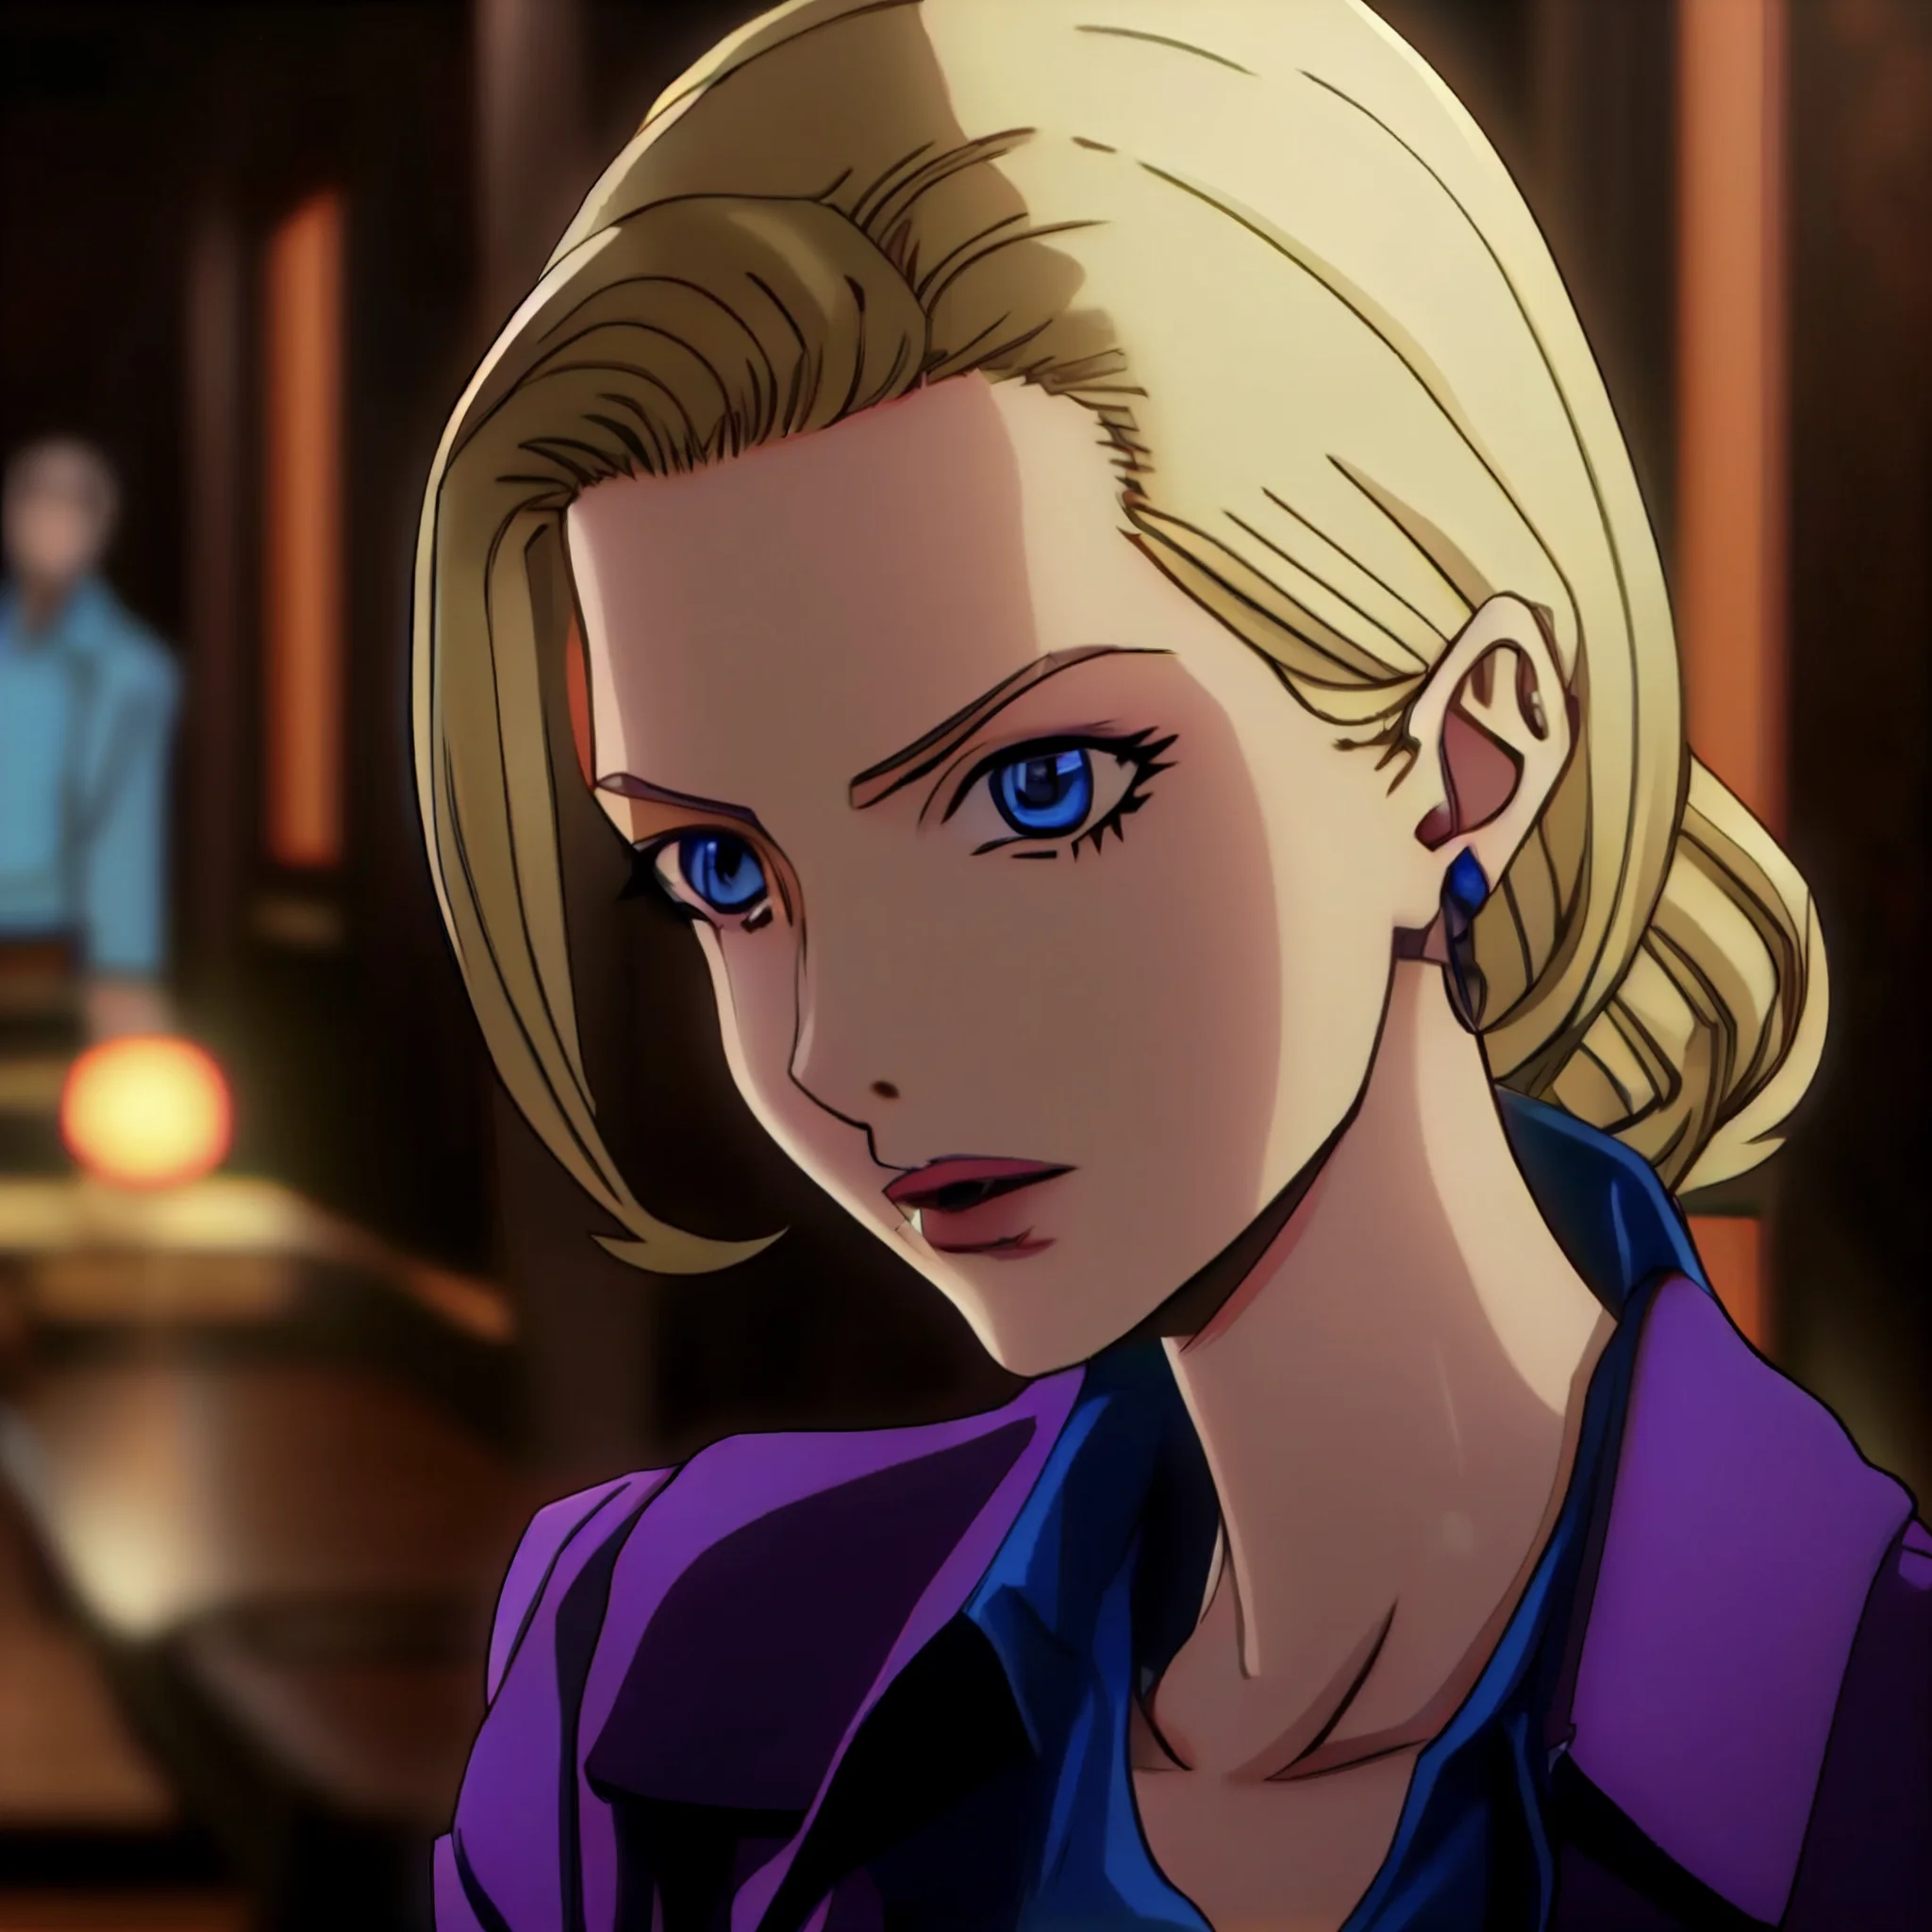 Bluewing_Anime_movie_screenshot_of_Android_18_in_Lupin_3rd_figh_cd3055d6-281b-4f8d-91f1-b61383902a42.webp